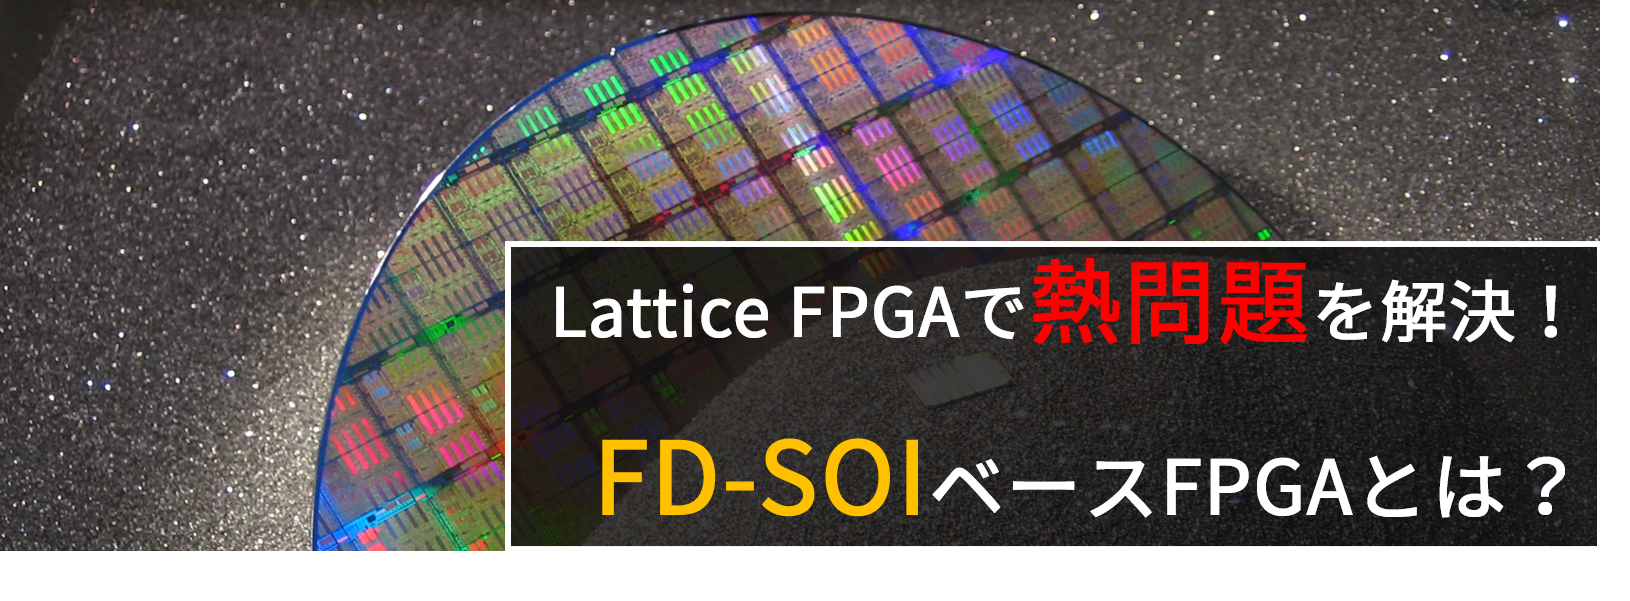 Solve Thermal Problems with Lattice FPGAs! What is FD-SOI based FPGA?